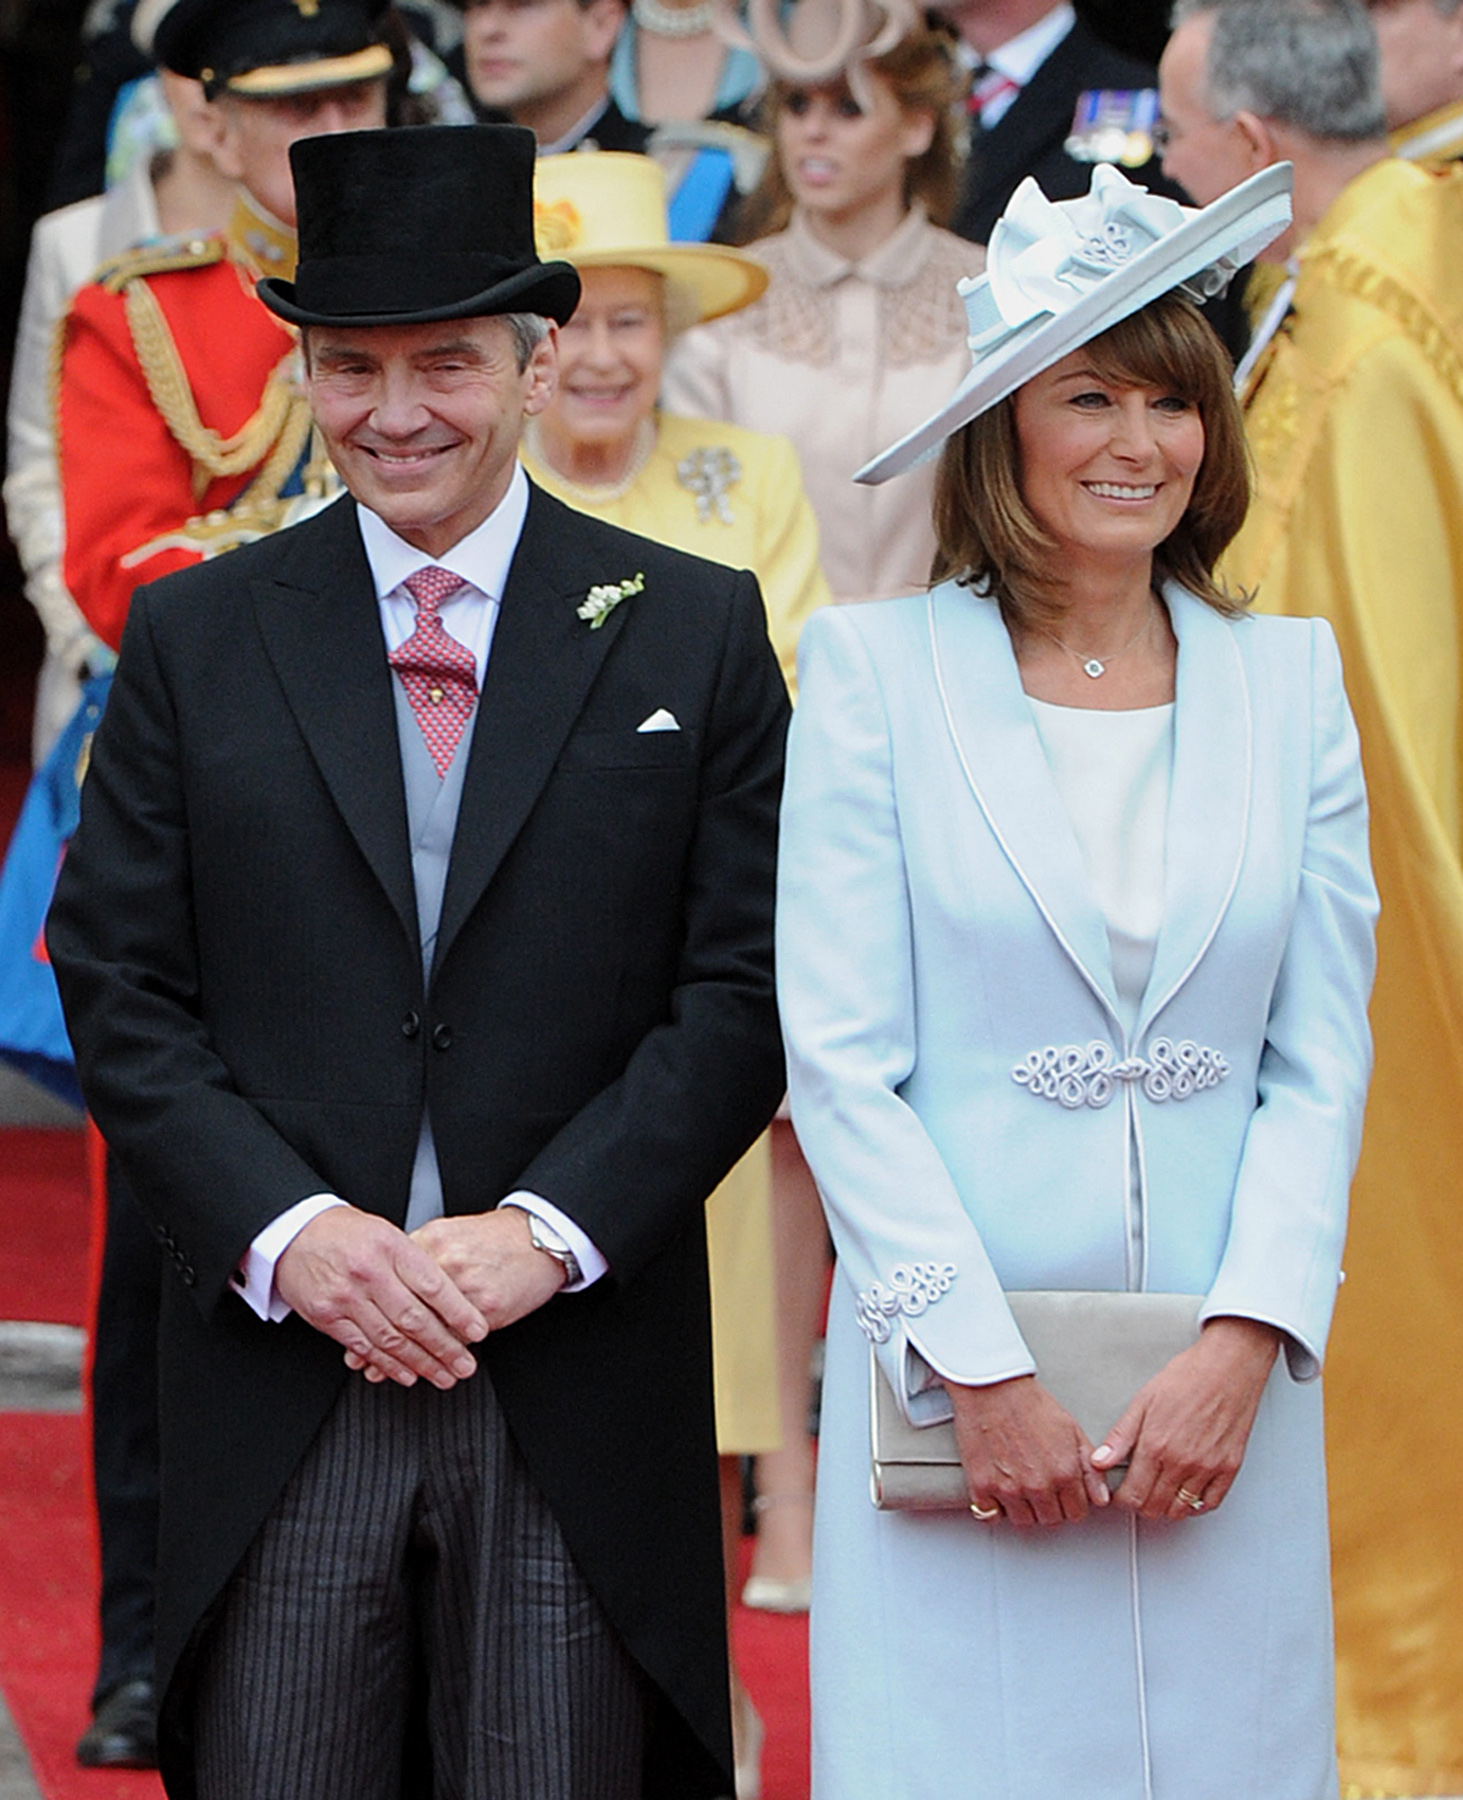 Michael Middleton and Carole Middleton at the wedding of the Prince and Princess of Wales in London in 2011 | Source: Getty Images